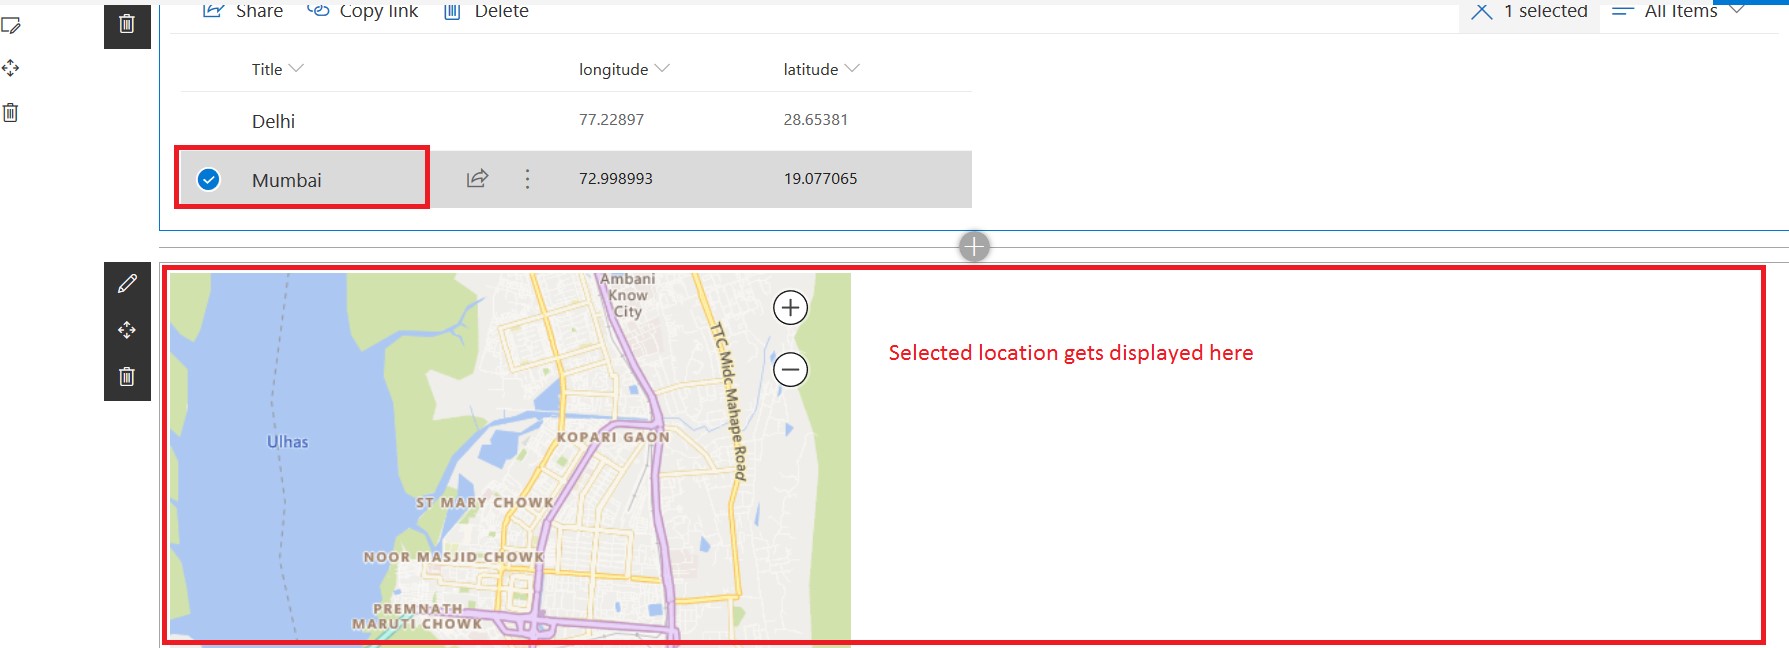 Selected location gets displayed in SharePoint Online using the embed web part